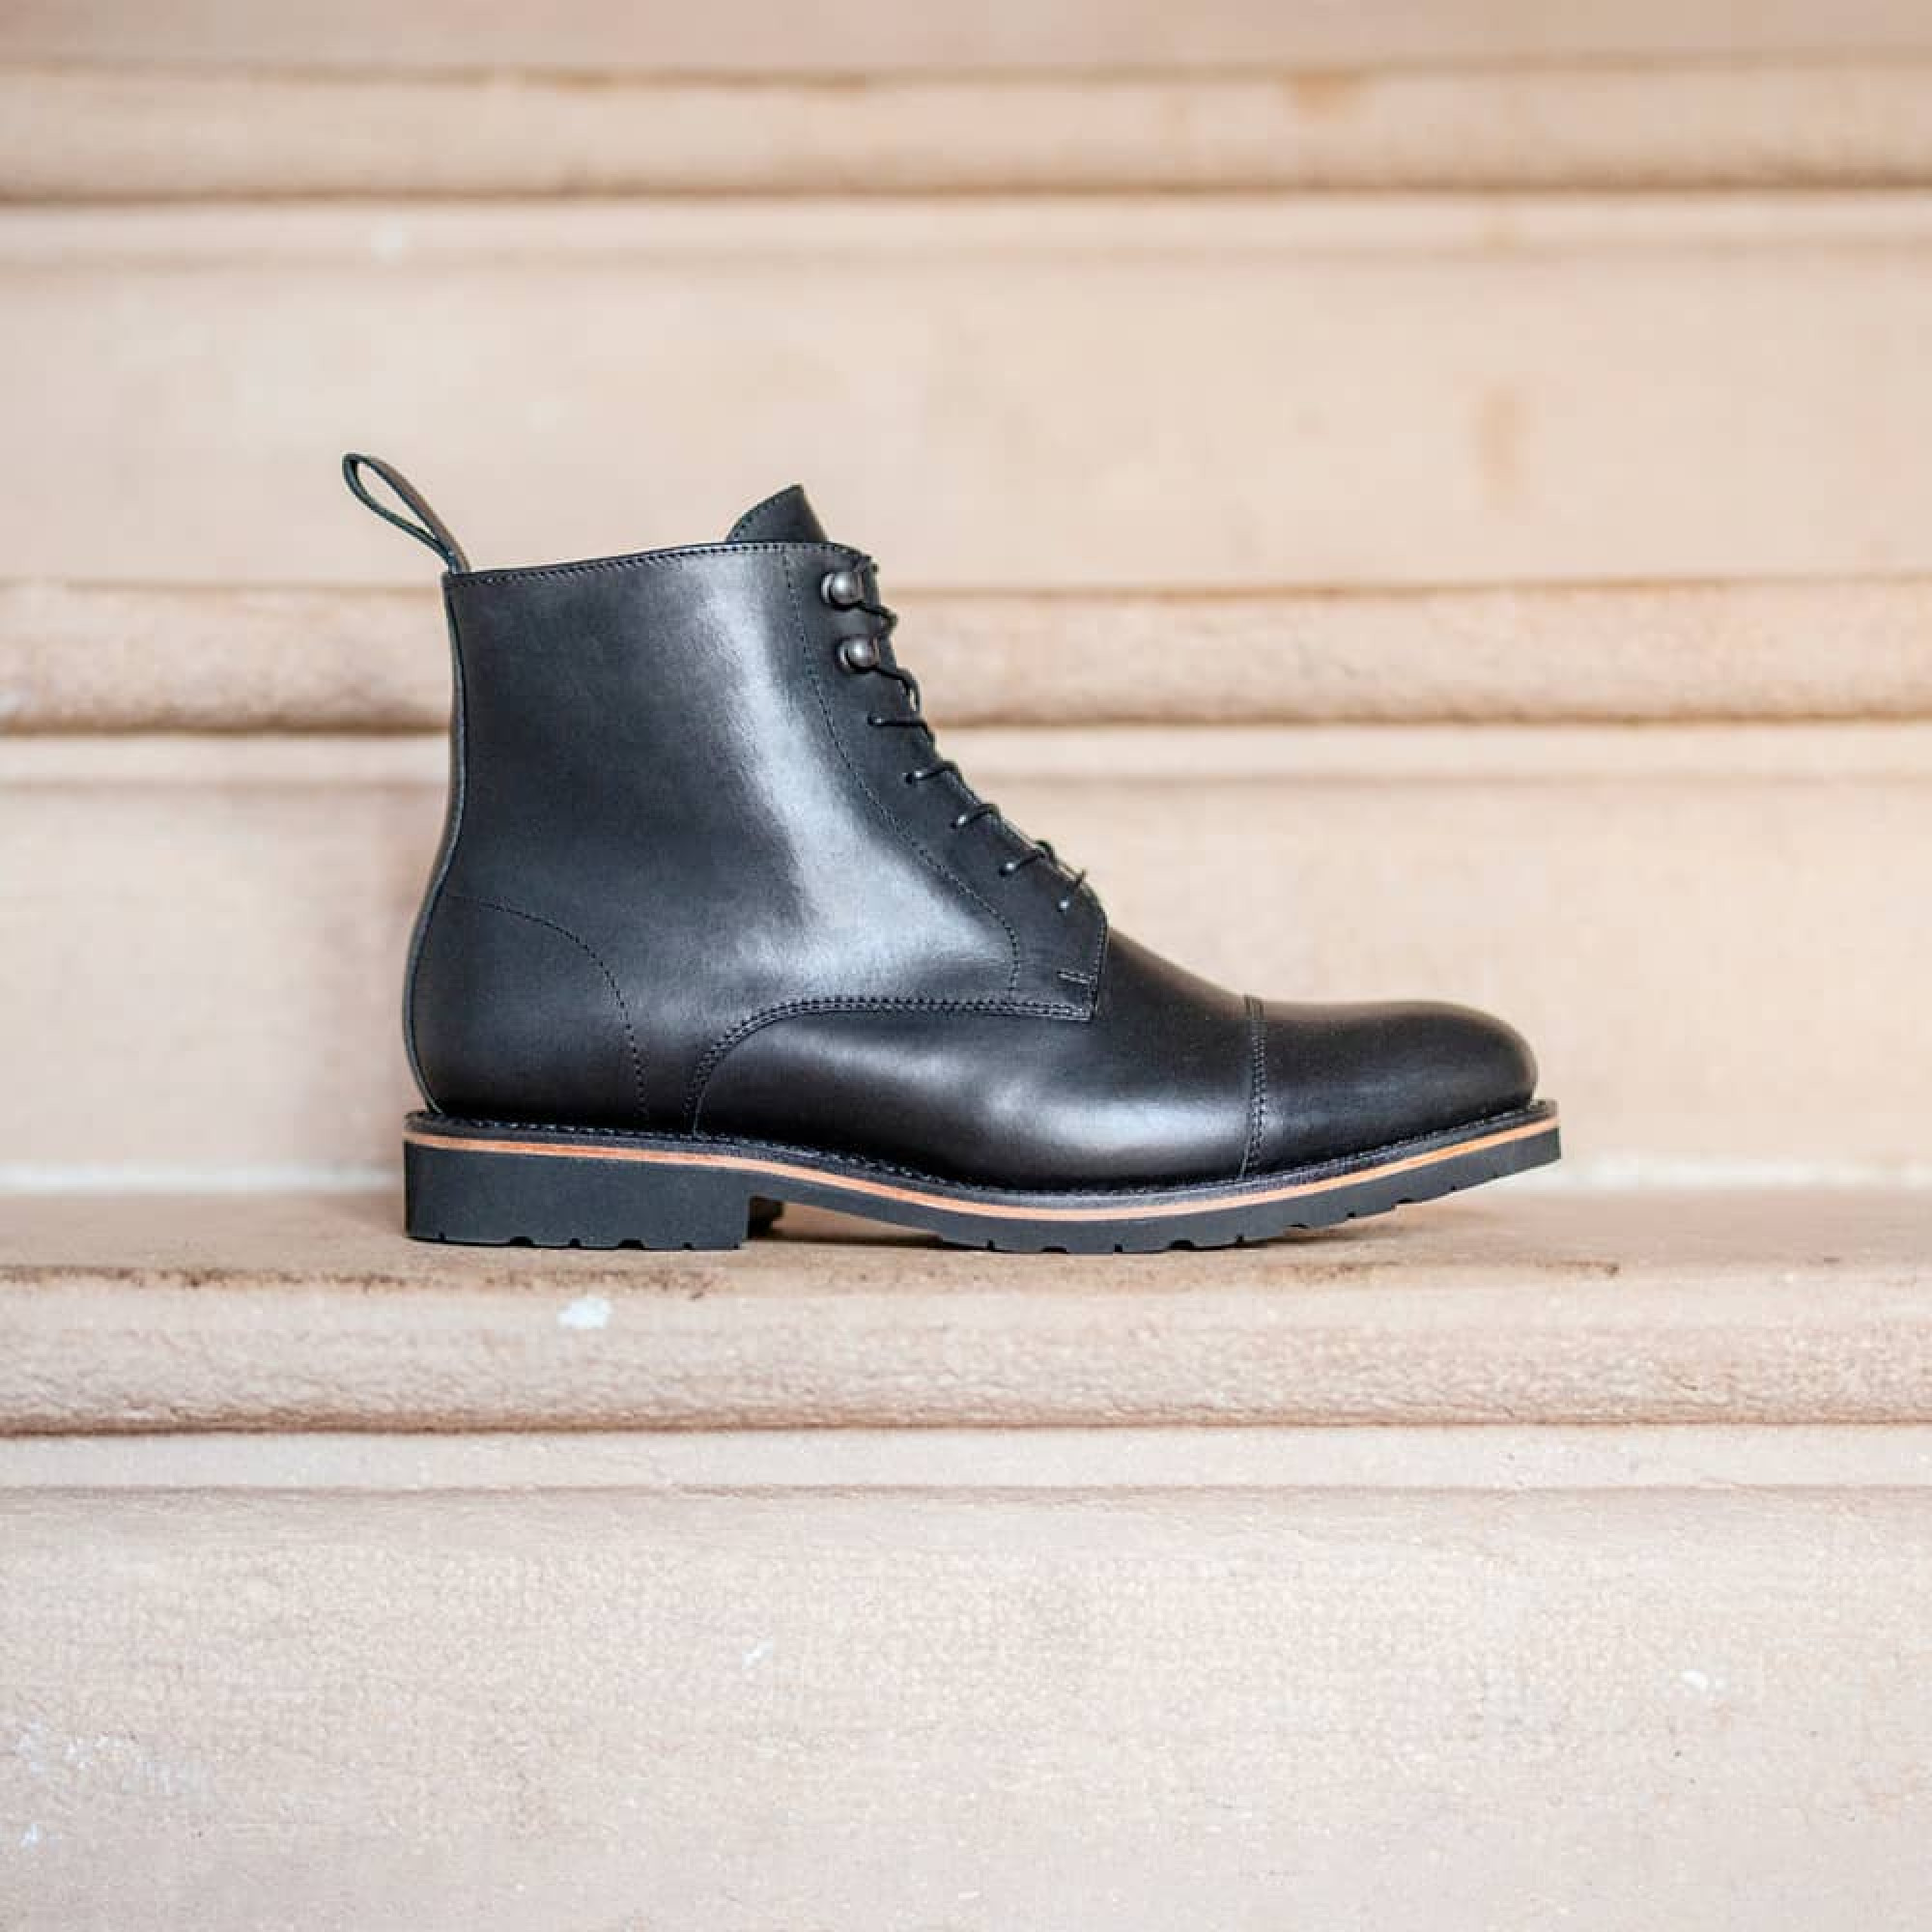 Chaussures boots homme - Cuir hydro noir - Cousu goodyear - Luxe